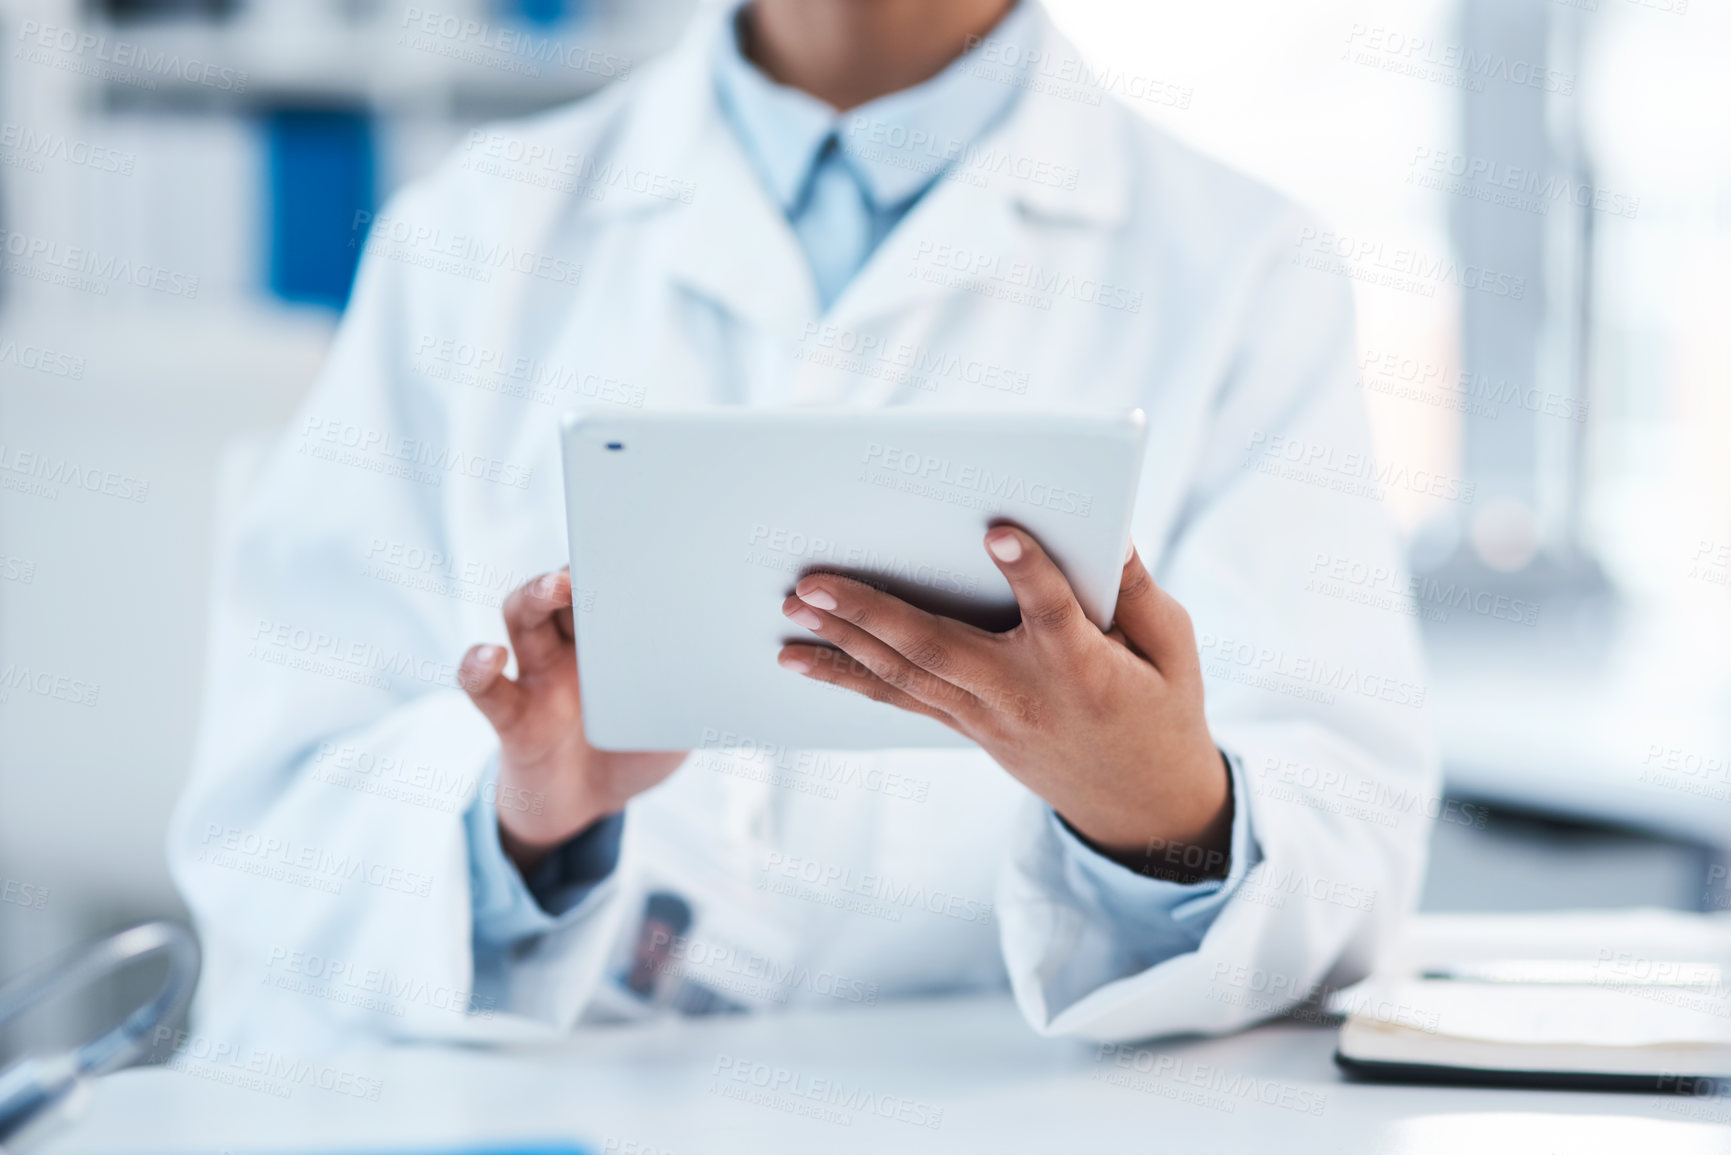 Buy stock photo Closeup shot of an unrecognisable scientist using a digital tablet in a lab